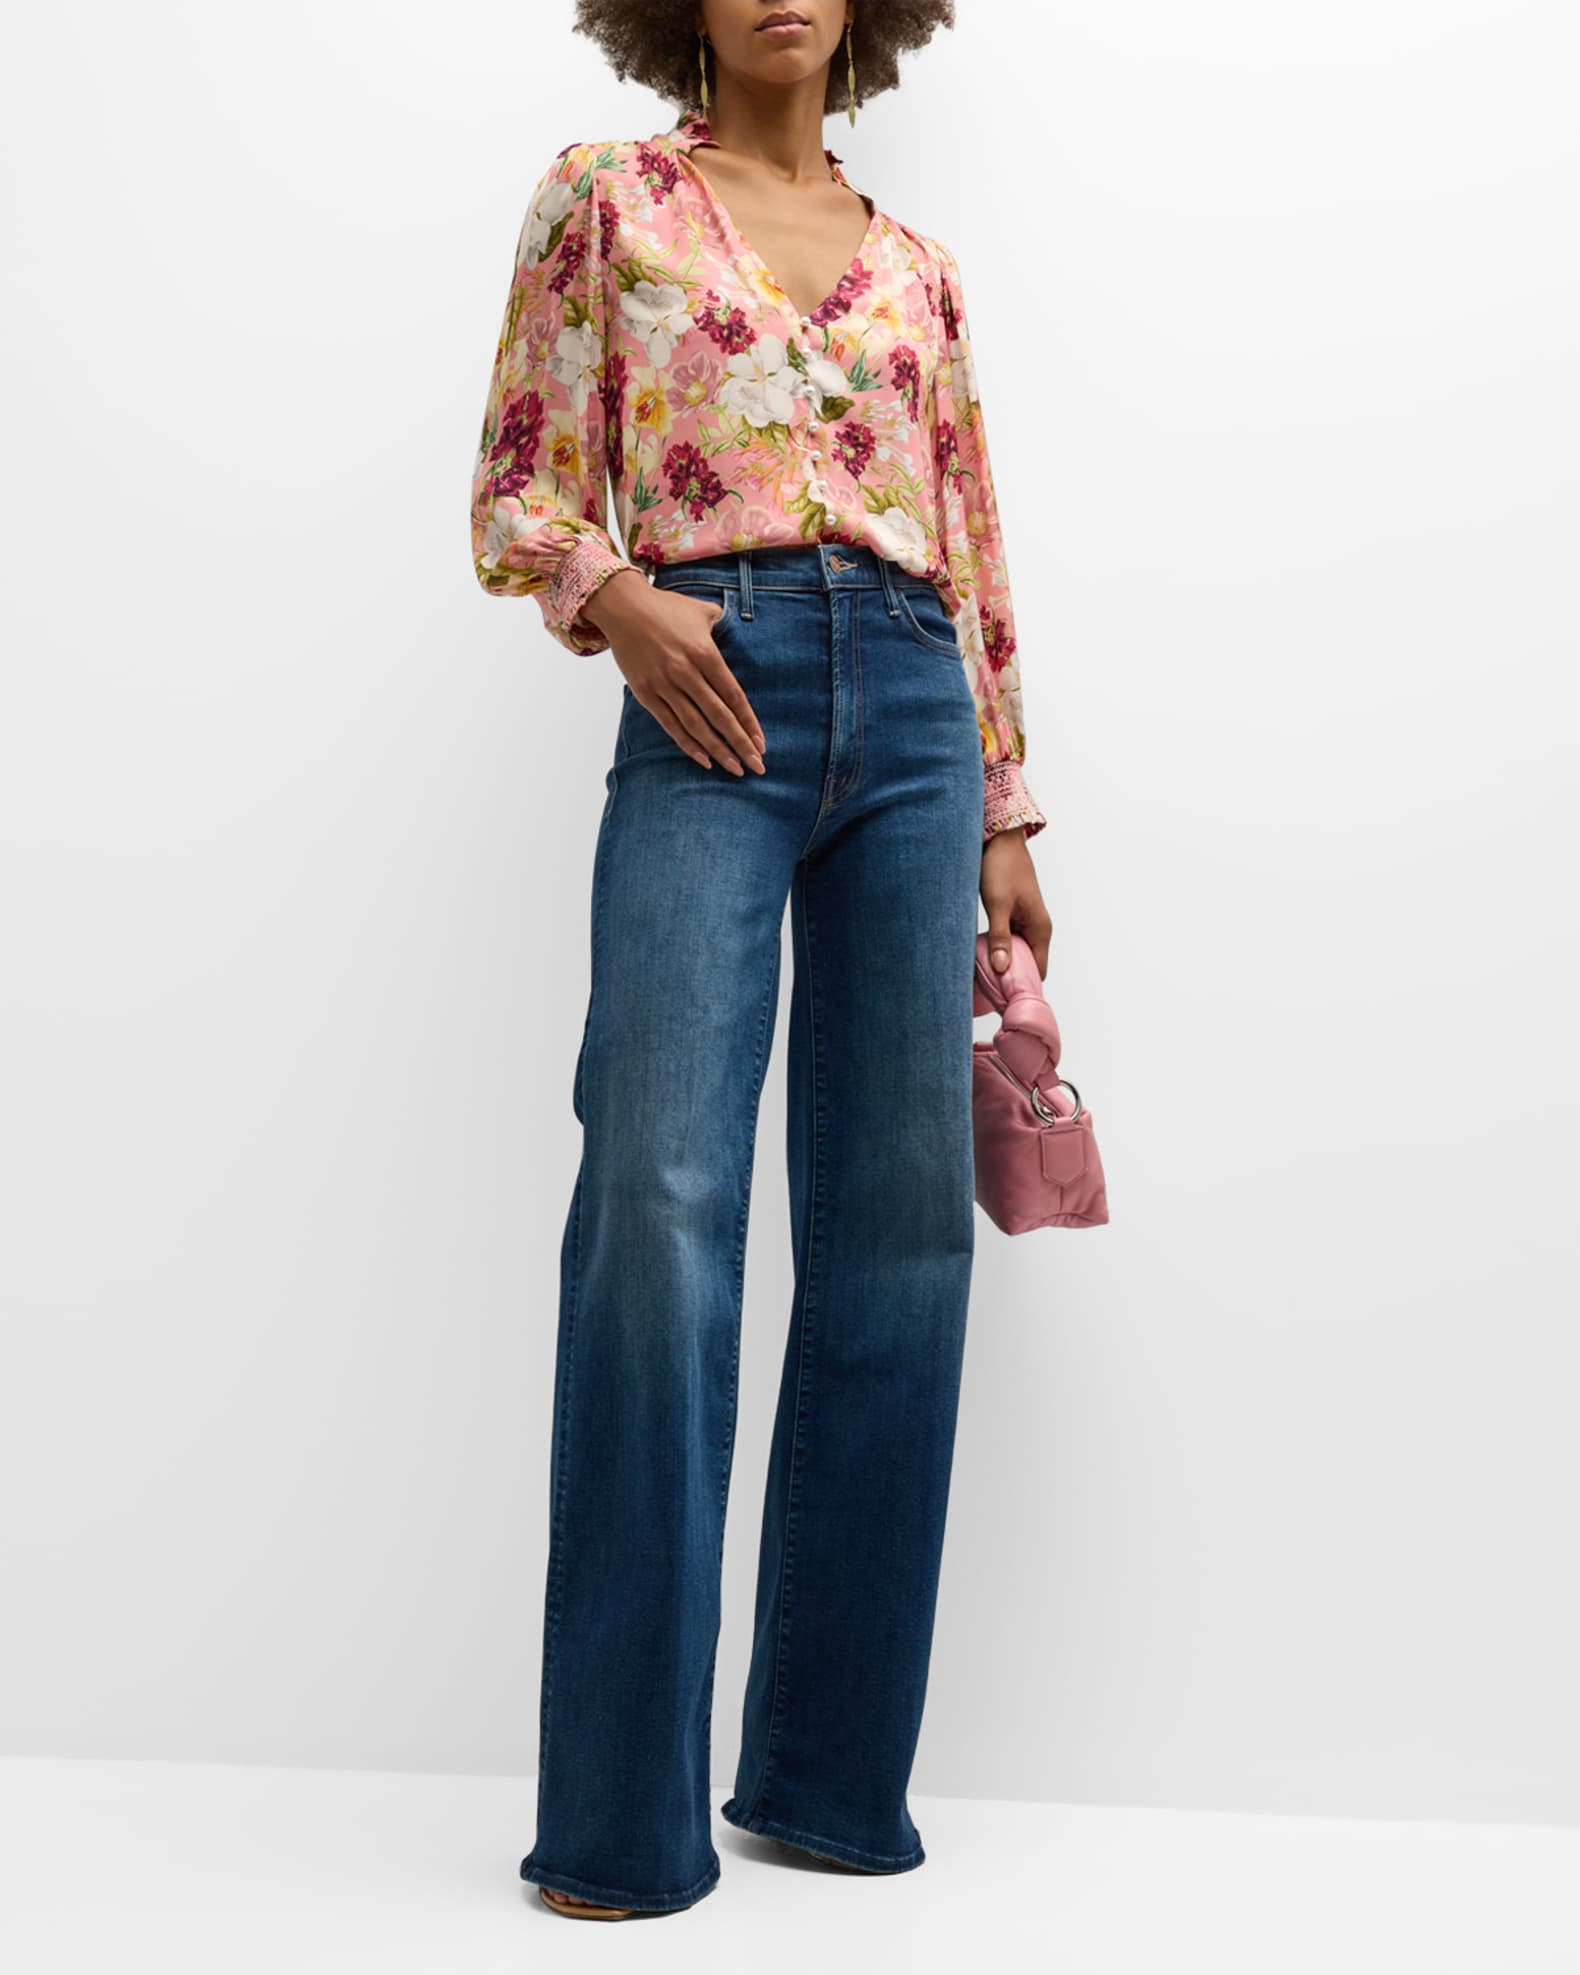 Alice + Olivia Reilly Floral-Print Blouse With Mandarin Collar | Neiman ...